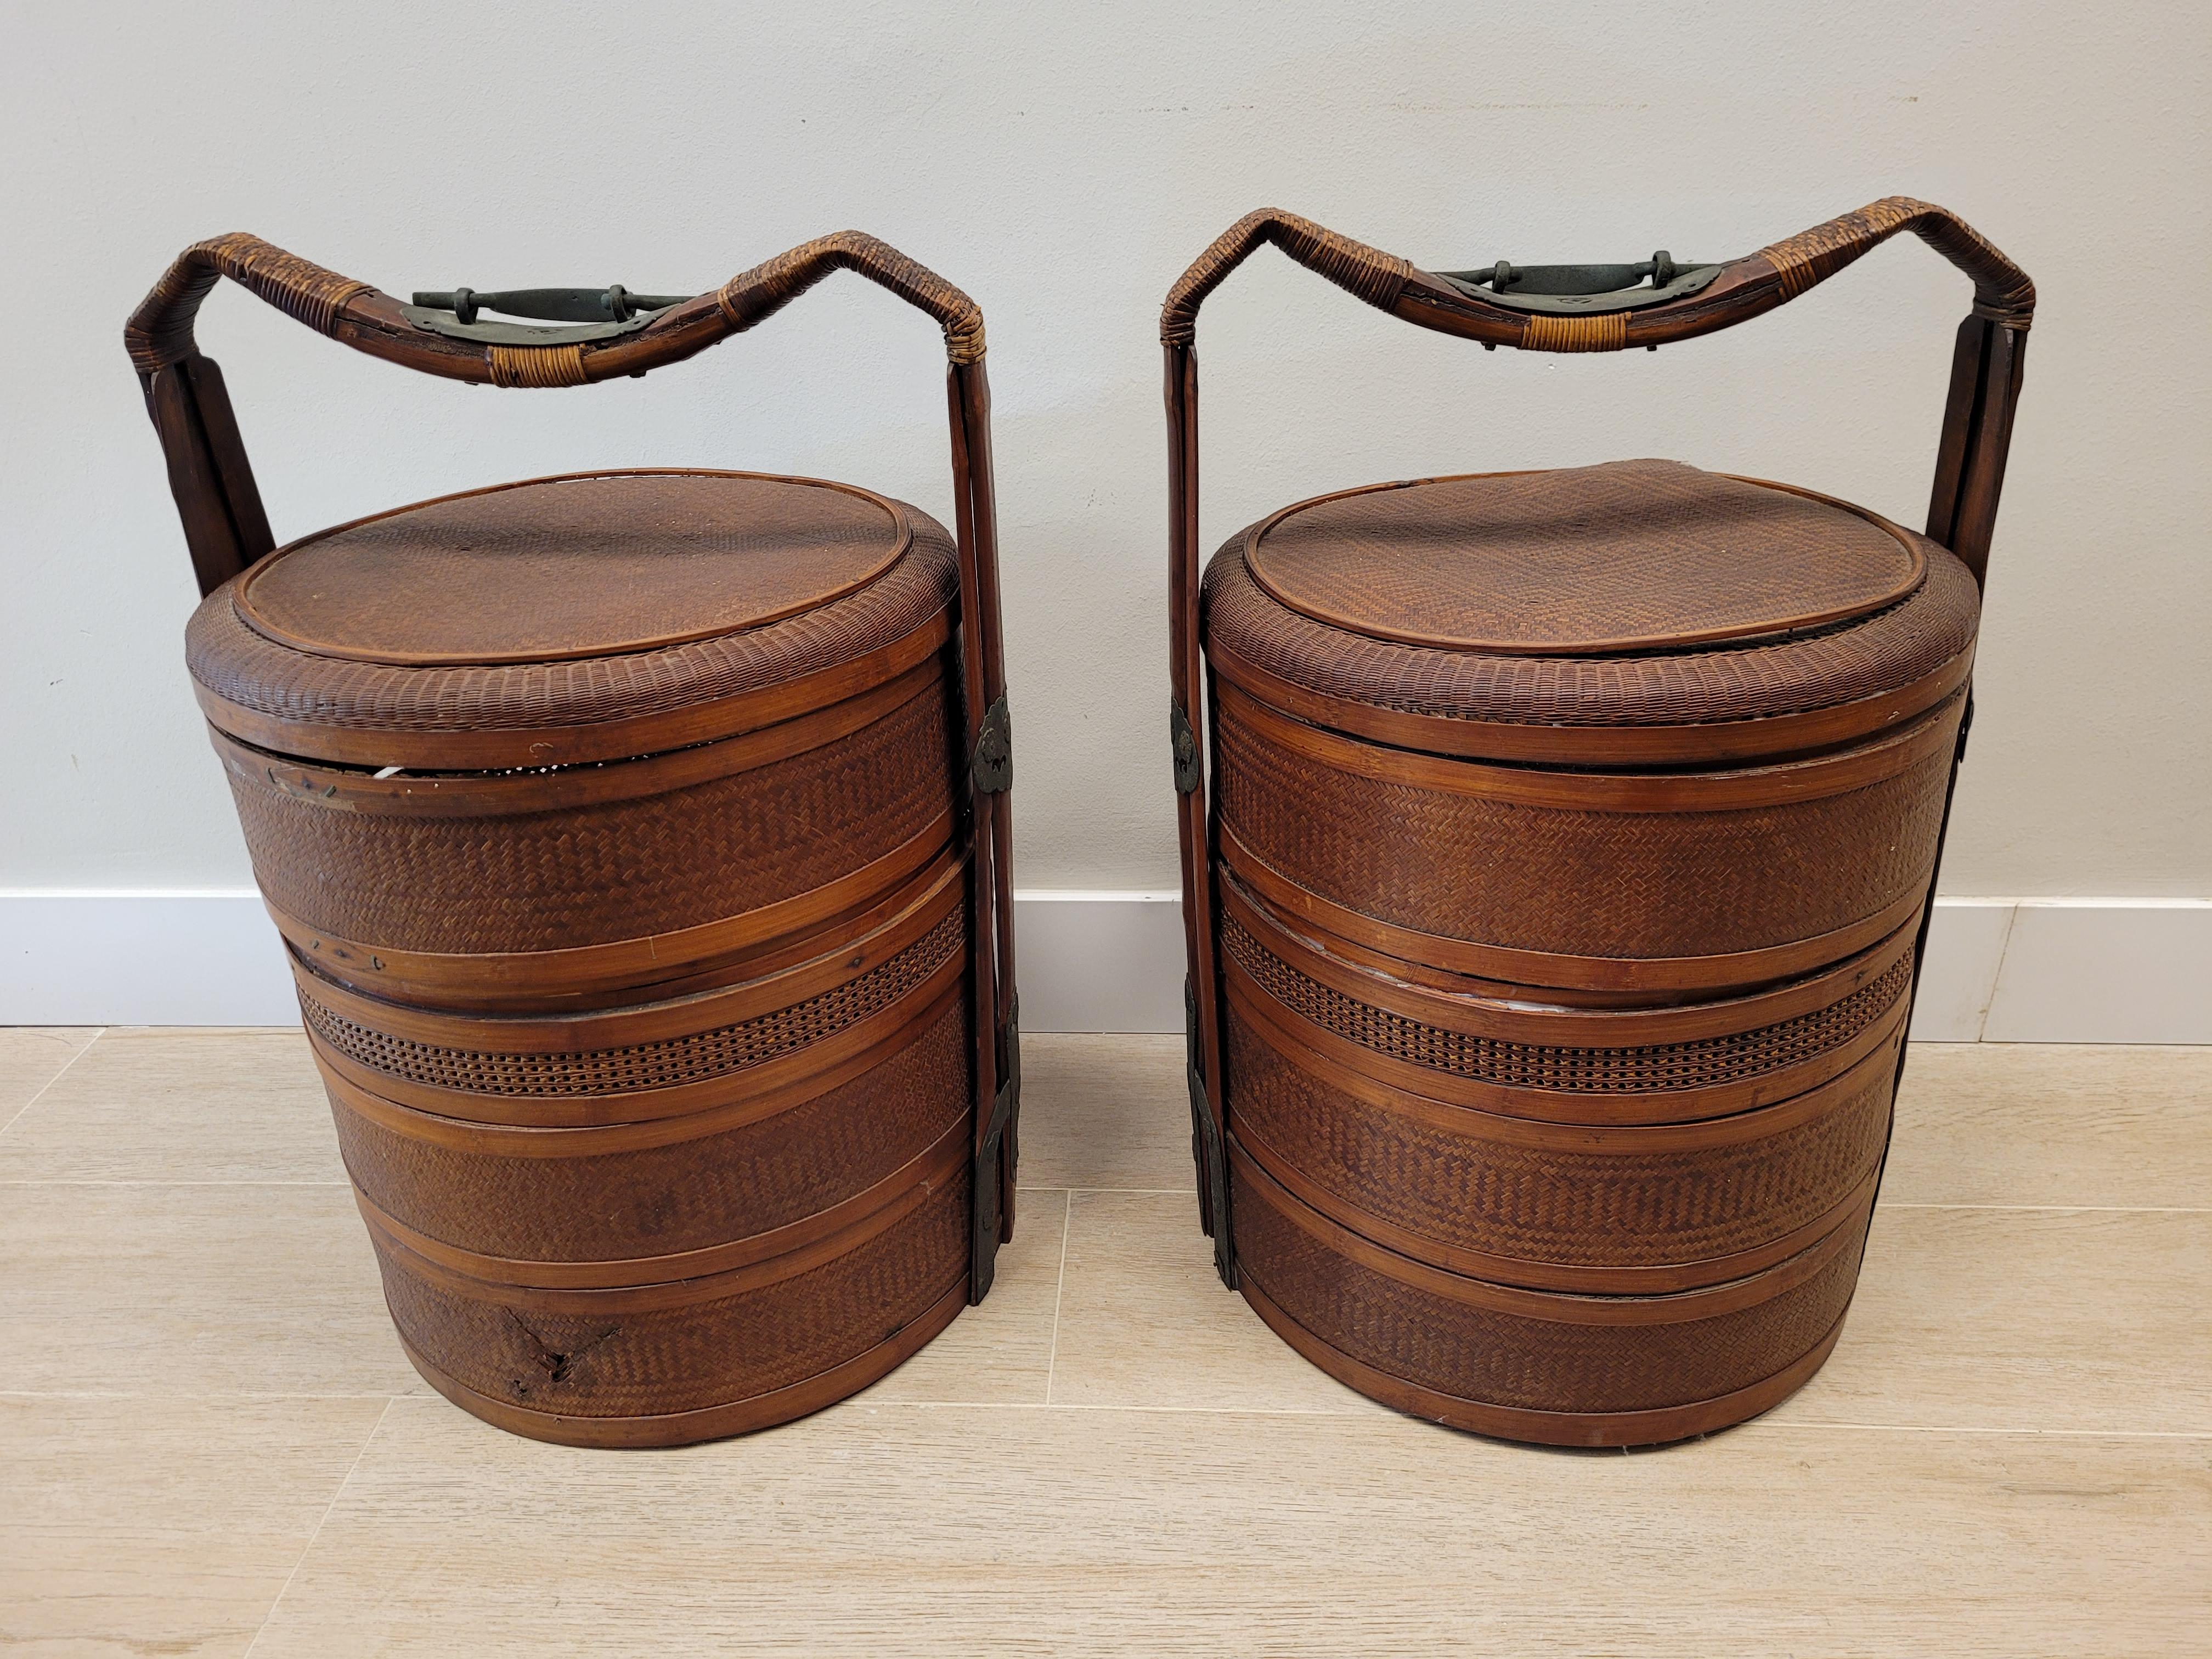 Wonderful pair of baskets made by hand in woven rattan, bamboo wood and bronze fittings, in China  19th century  Dao - Guang  period ( 1821 - 1850 )
They are two large  cinnamon red  baskets, used in the wedding ceremony to store the food for the